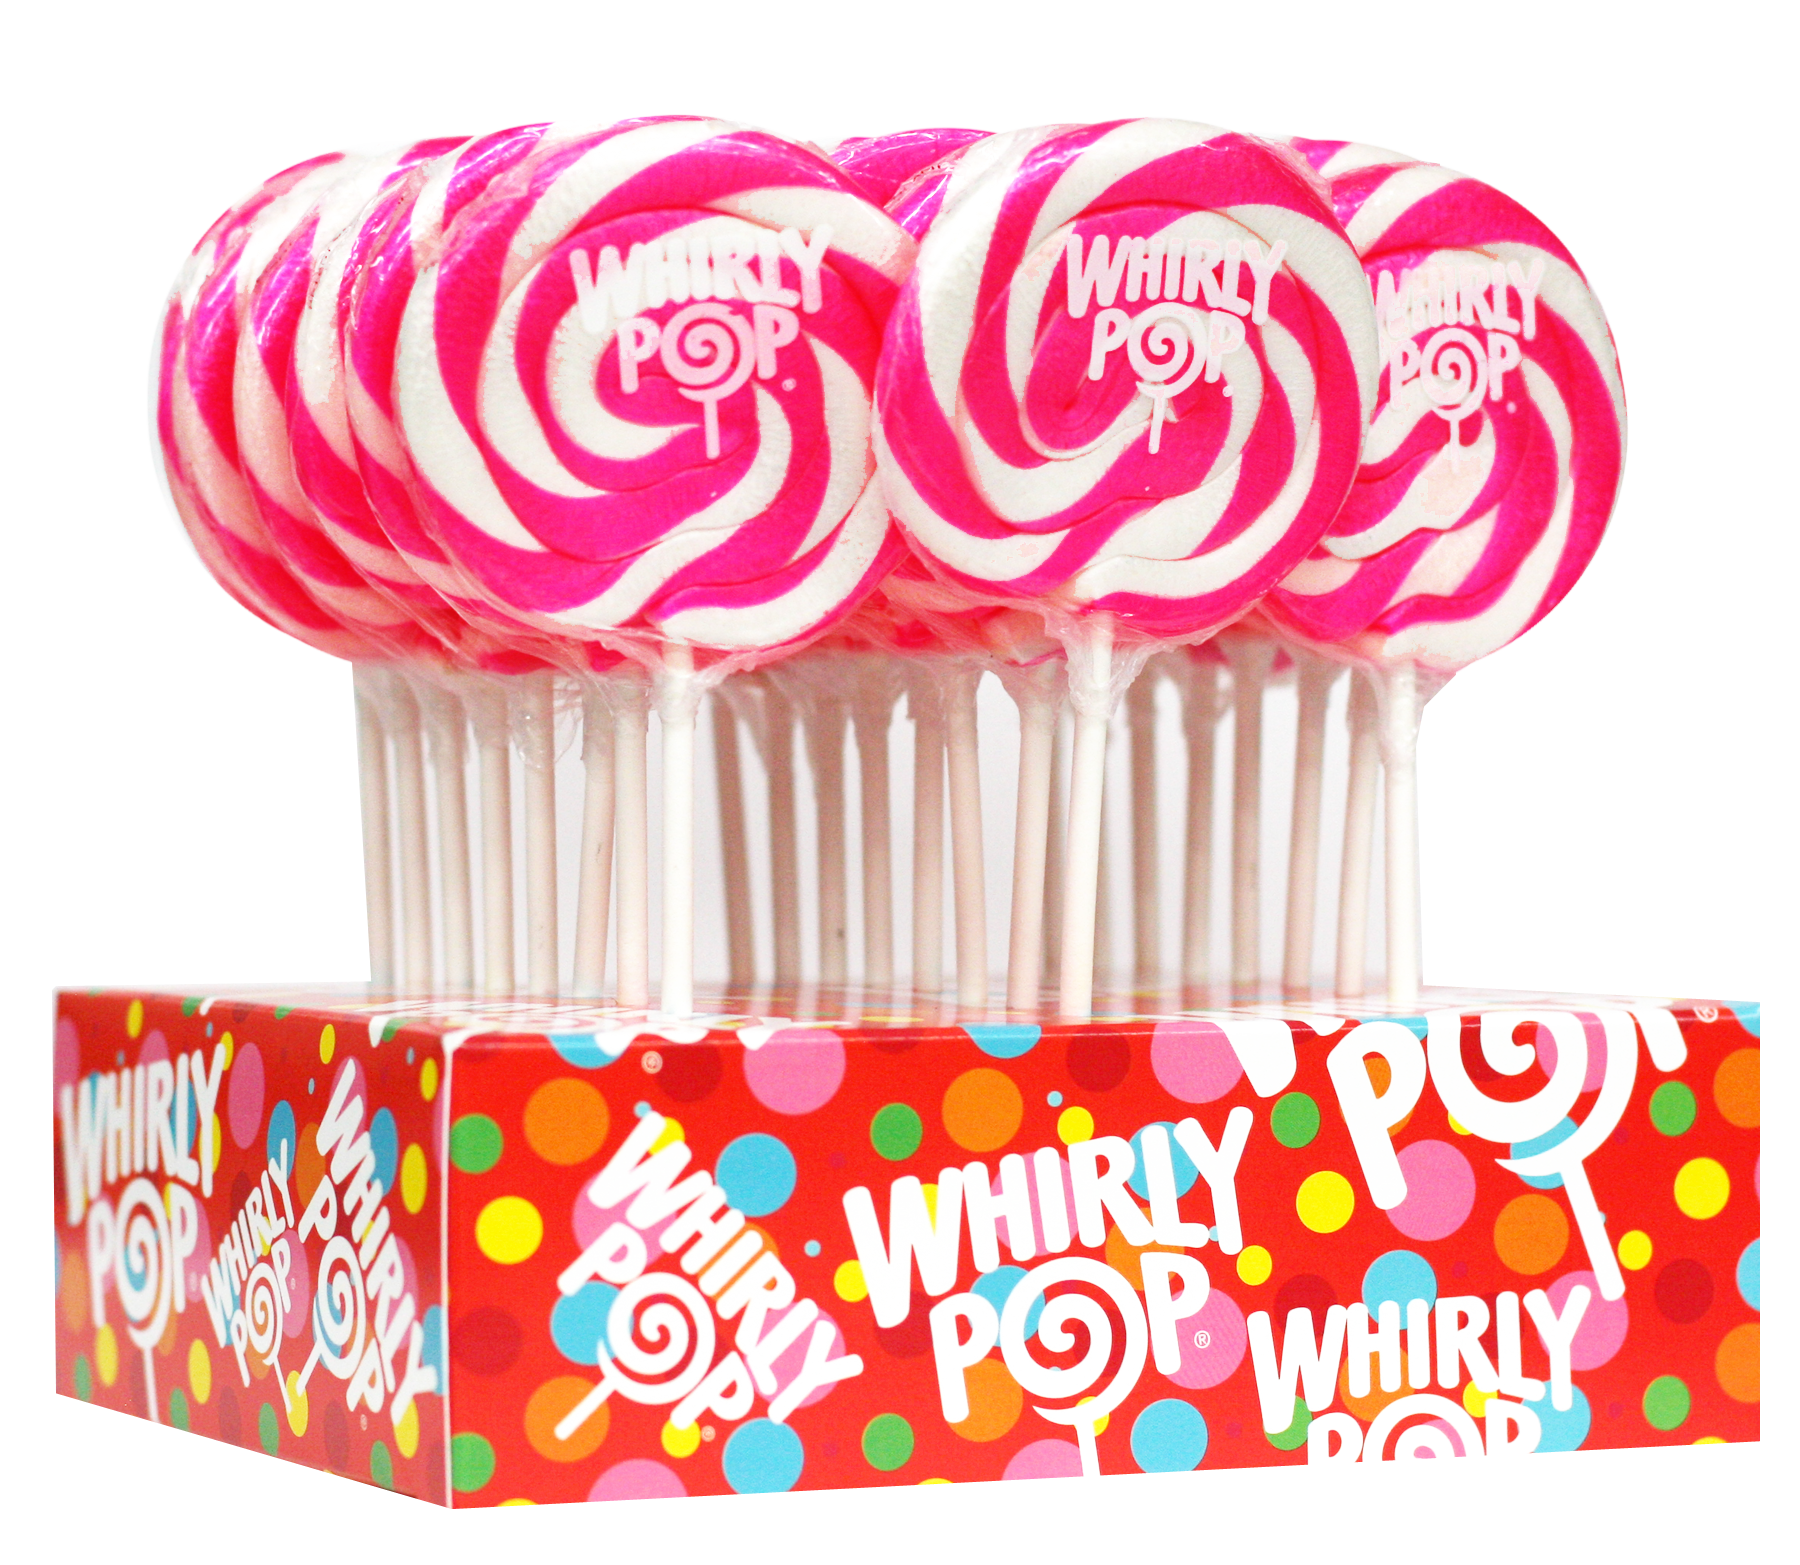 WHIRLY POP PINK